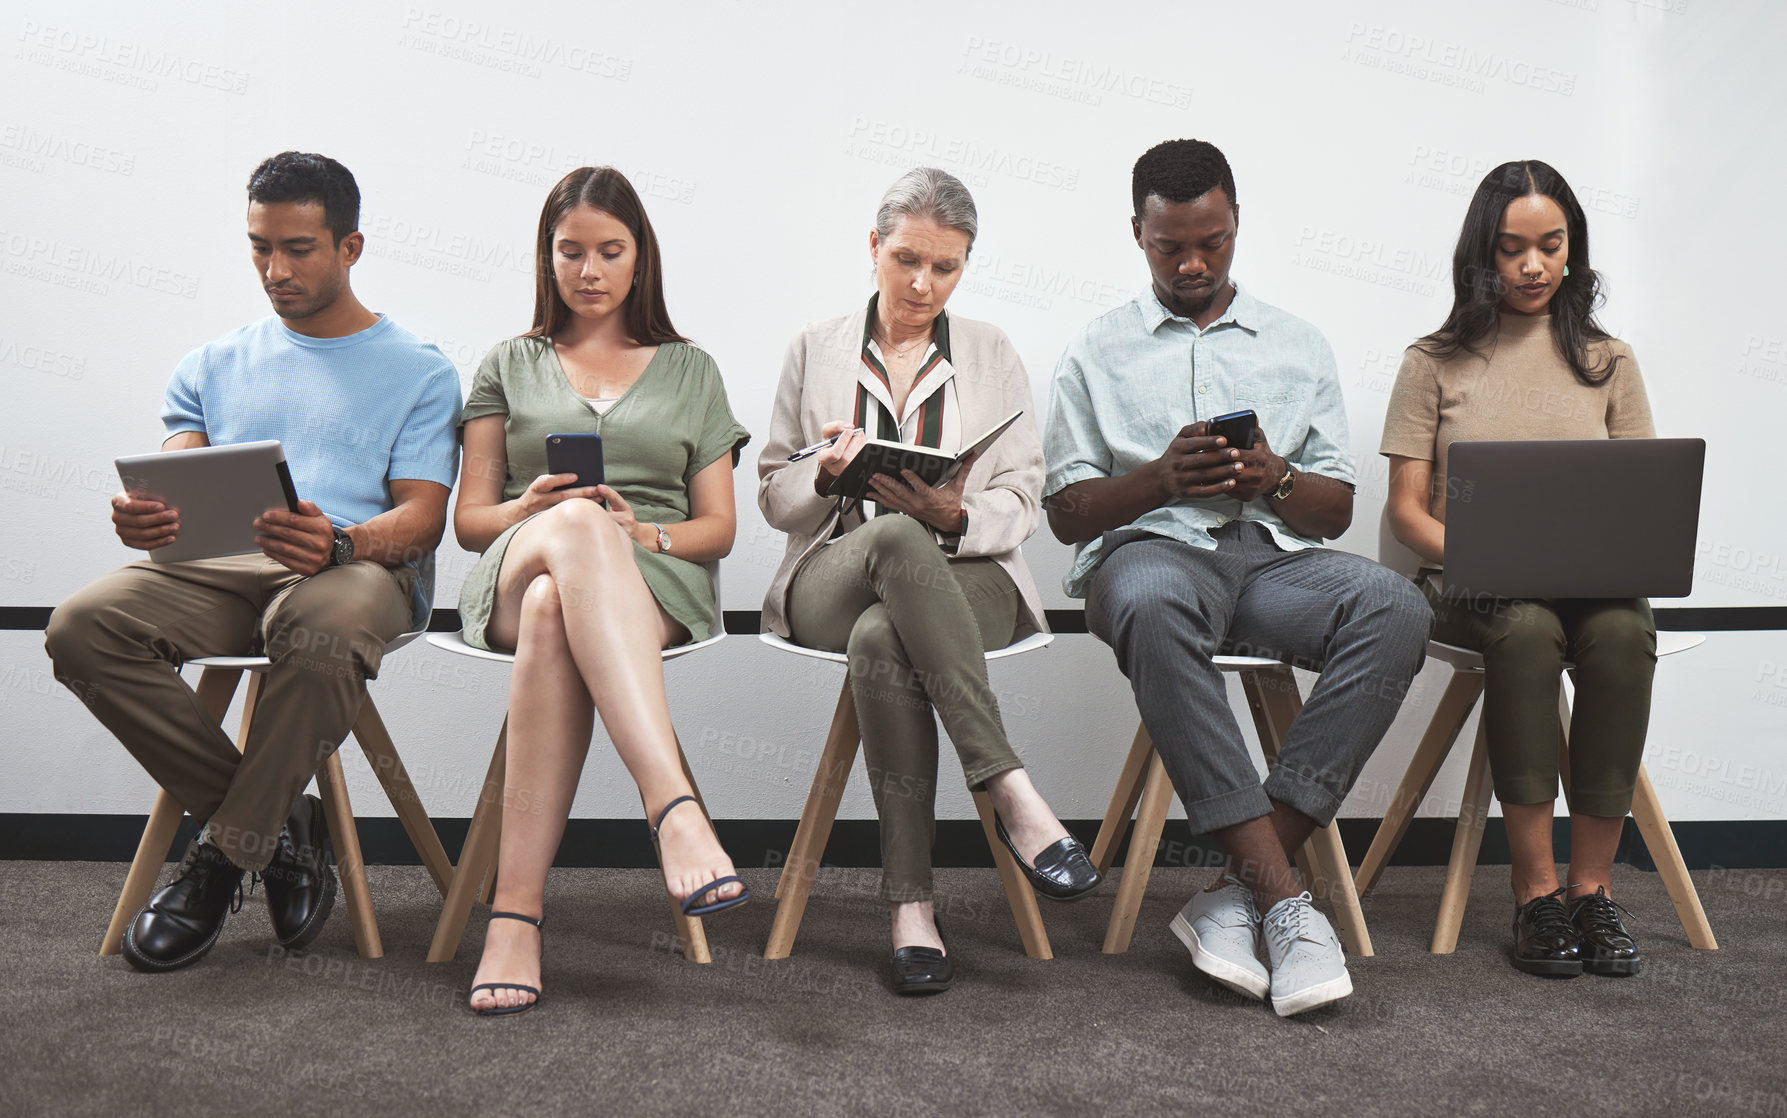 Buy stock photo Shot of a group of businesspeople using digital devices while sitting together in a line against a white wall